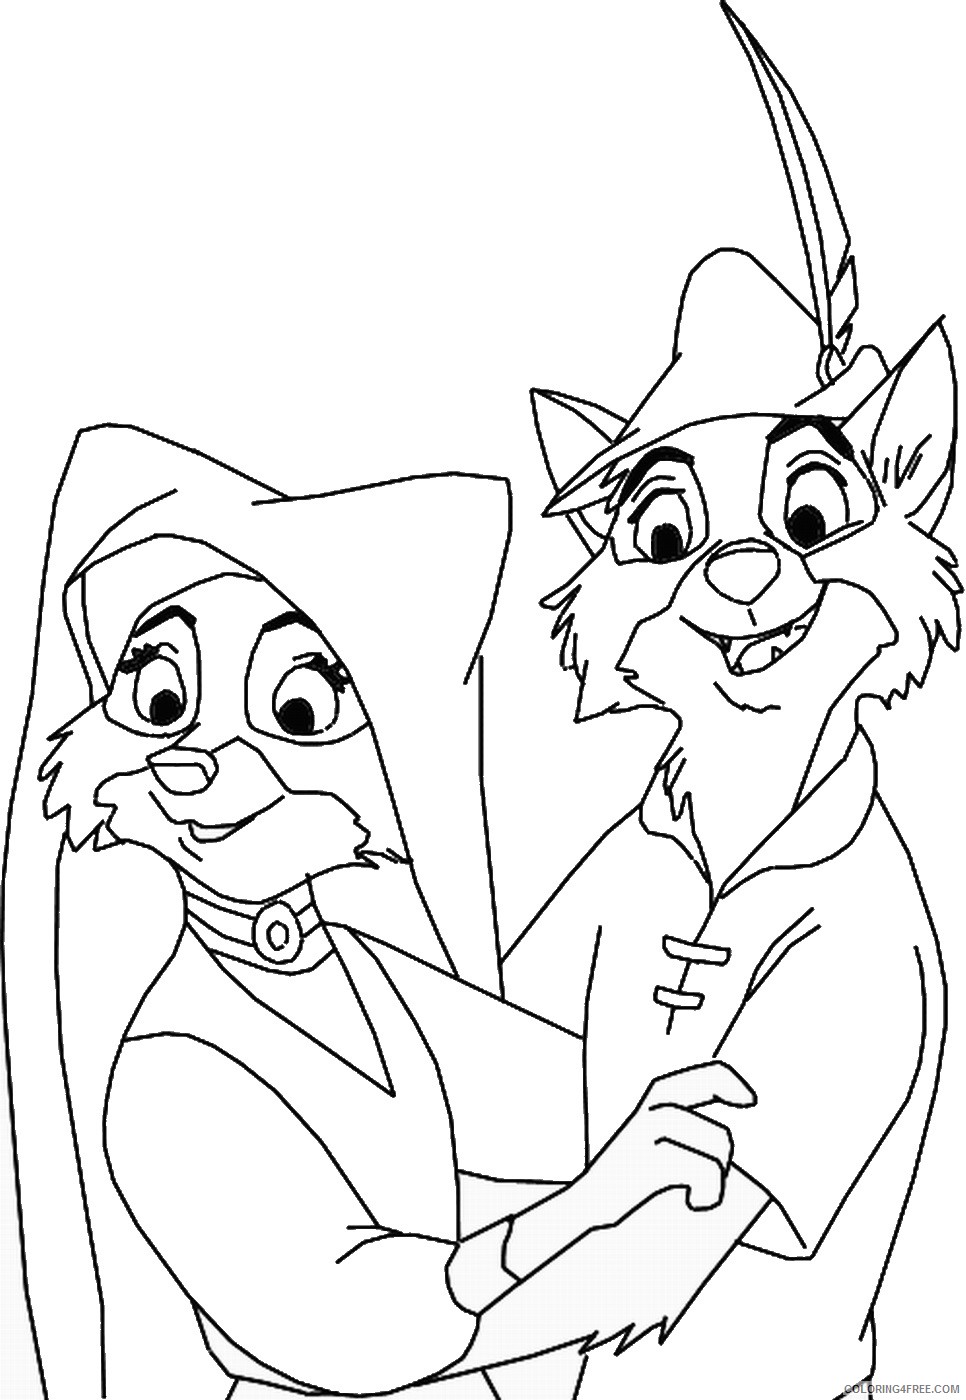 Robin Hood Coloring Pages Cartoons robin_hood_cl24 Printable 2020 5360 Coloring4free